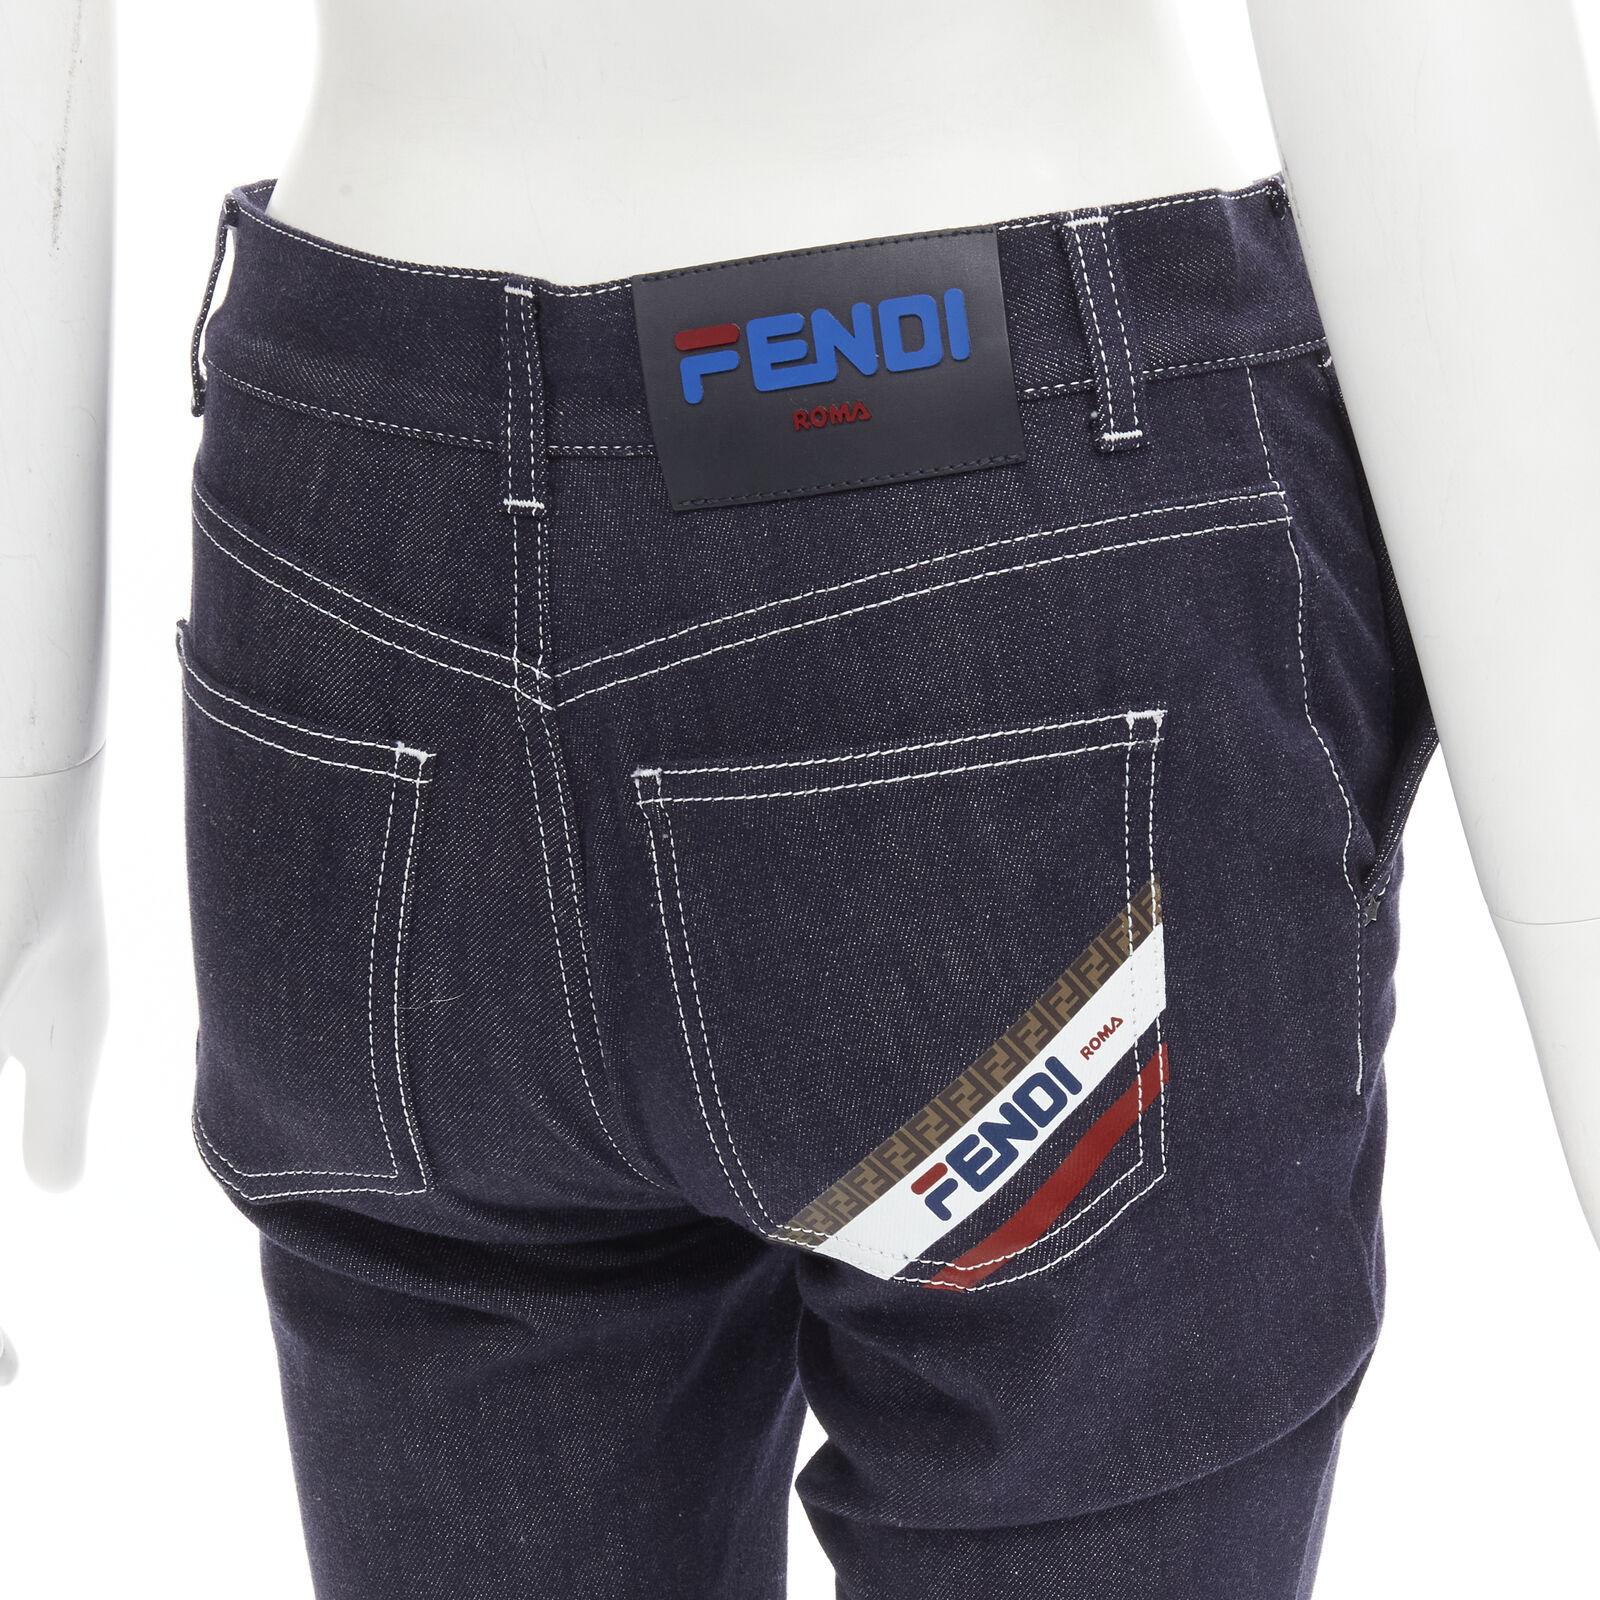 FENDI FILA dark indigo denim logo back pocket overstitched cropped jeans XS
Reference: ANWU/A00830
Brand: Fendi
Model: Fila collaboration
Material: Feels like cotton
Color: Blue
Pattern: Solid
Closure: Zip Fly
Extra Details: Silver FF button. White